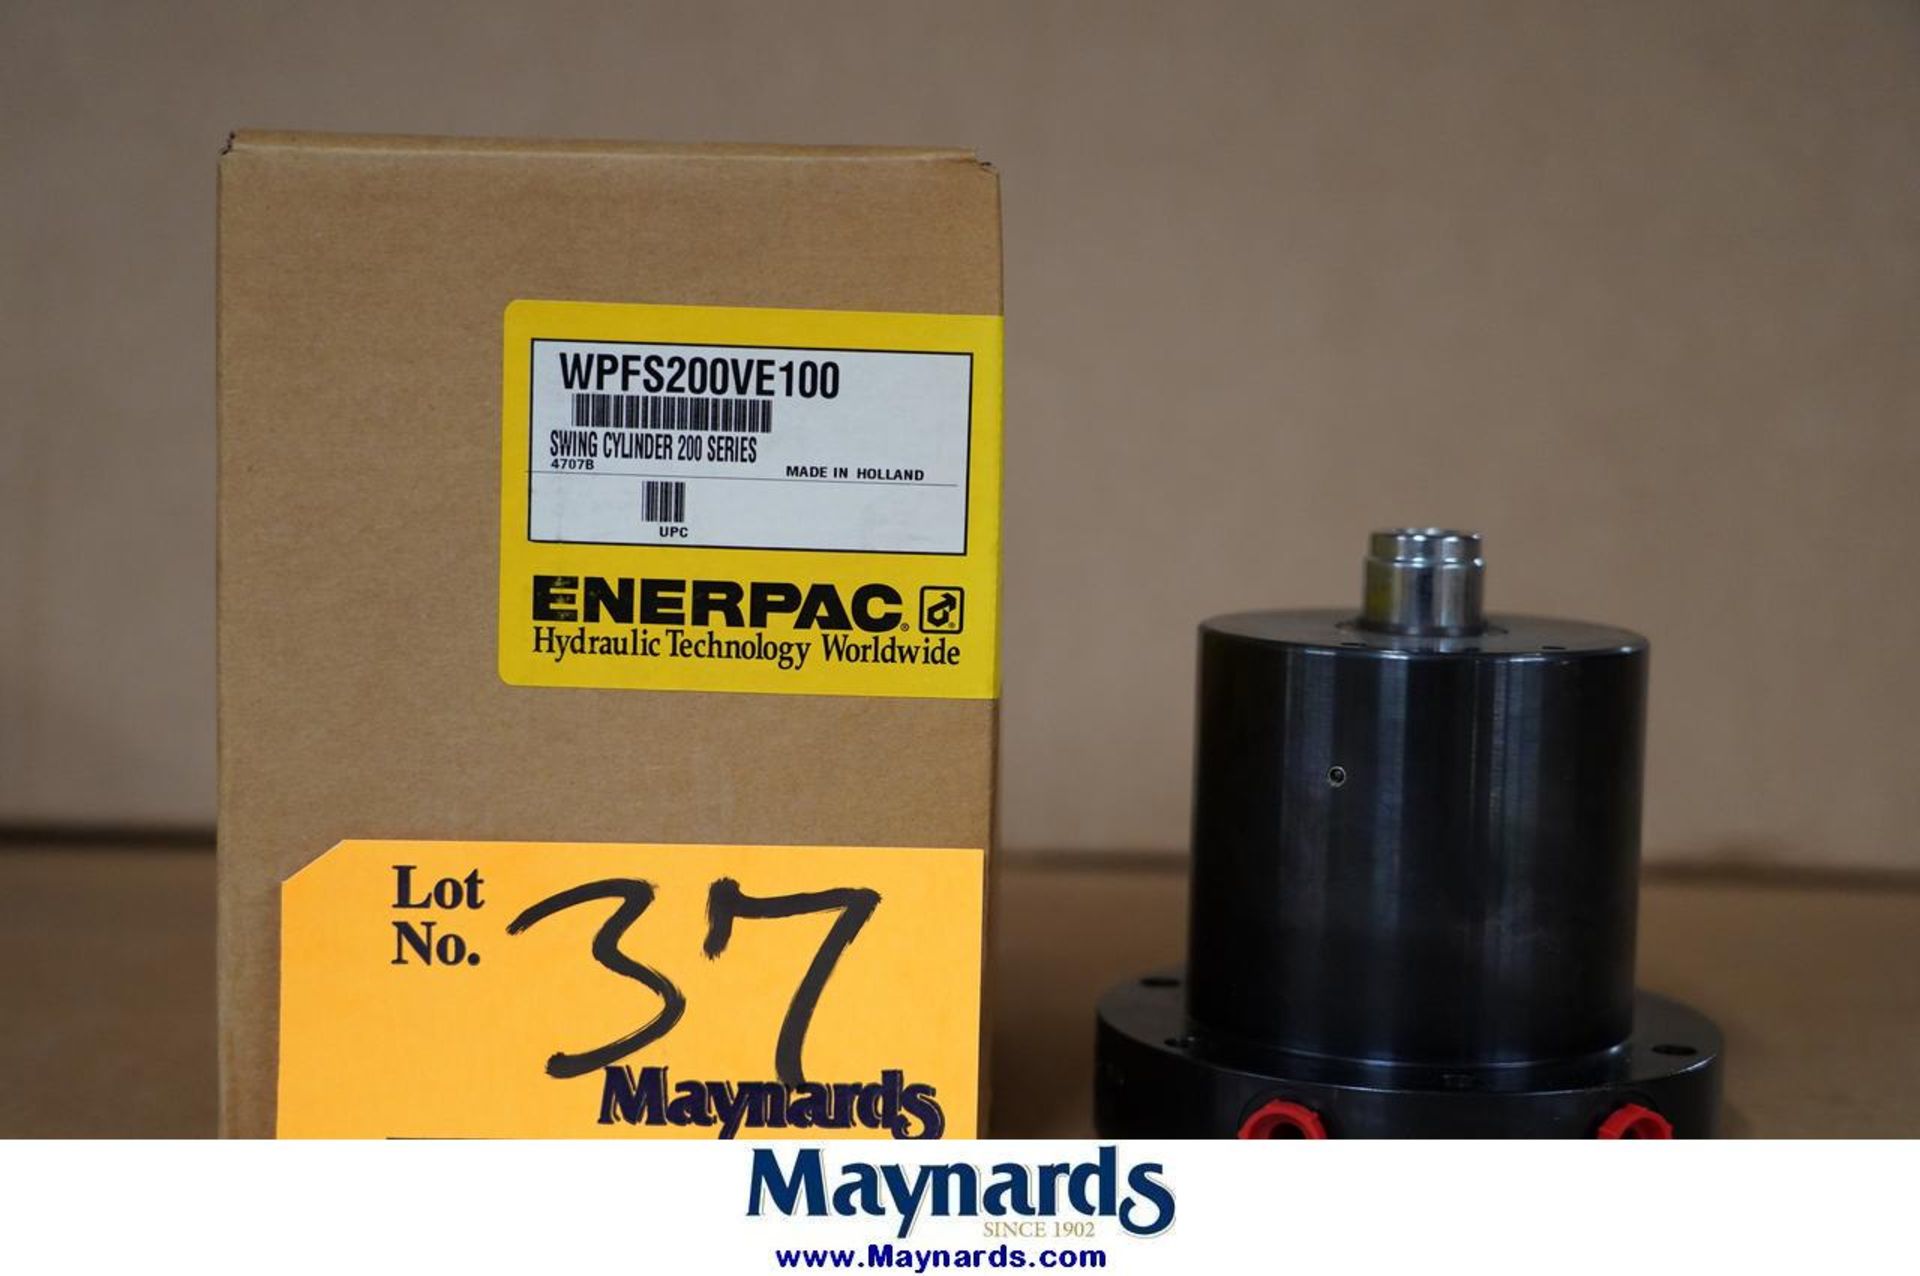 Enerpac WPFS200VE100 Swing Cylinder - Image 2 of 3